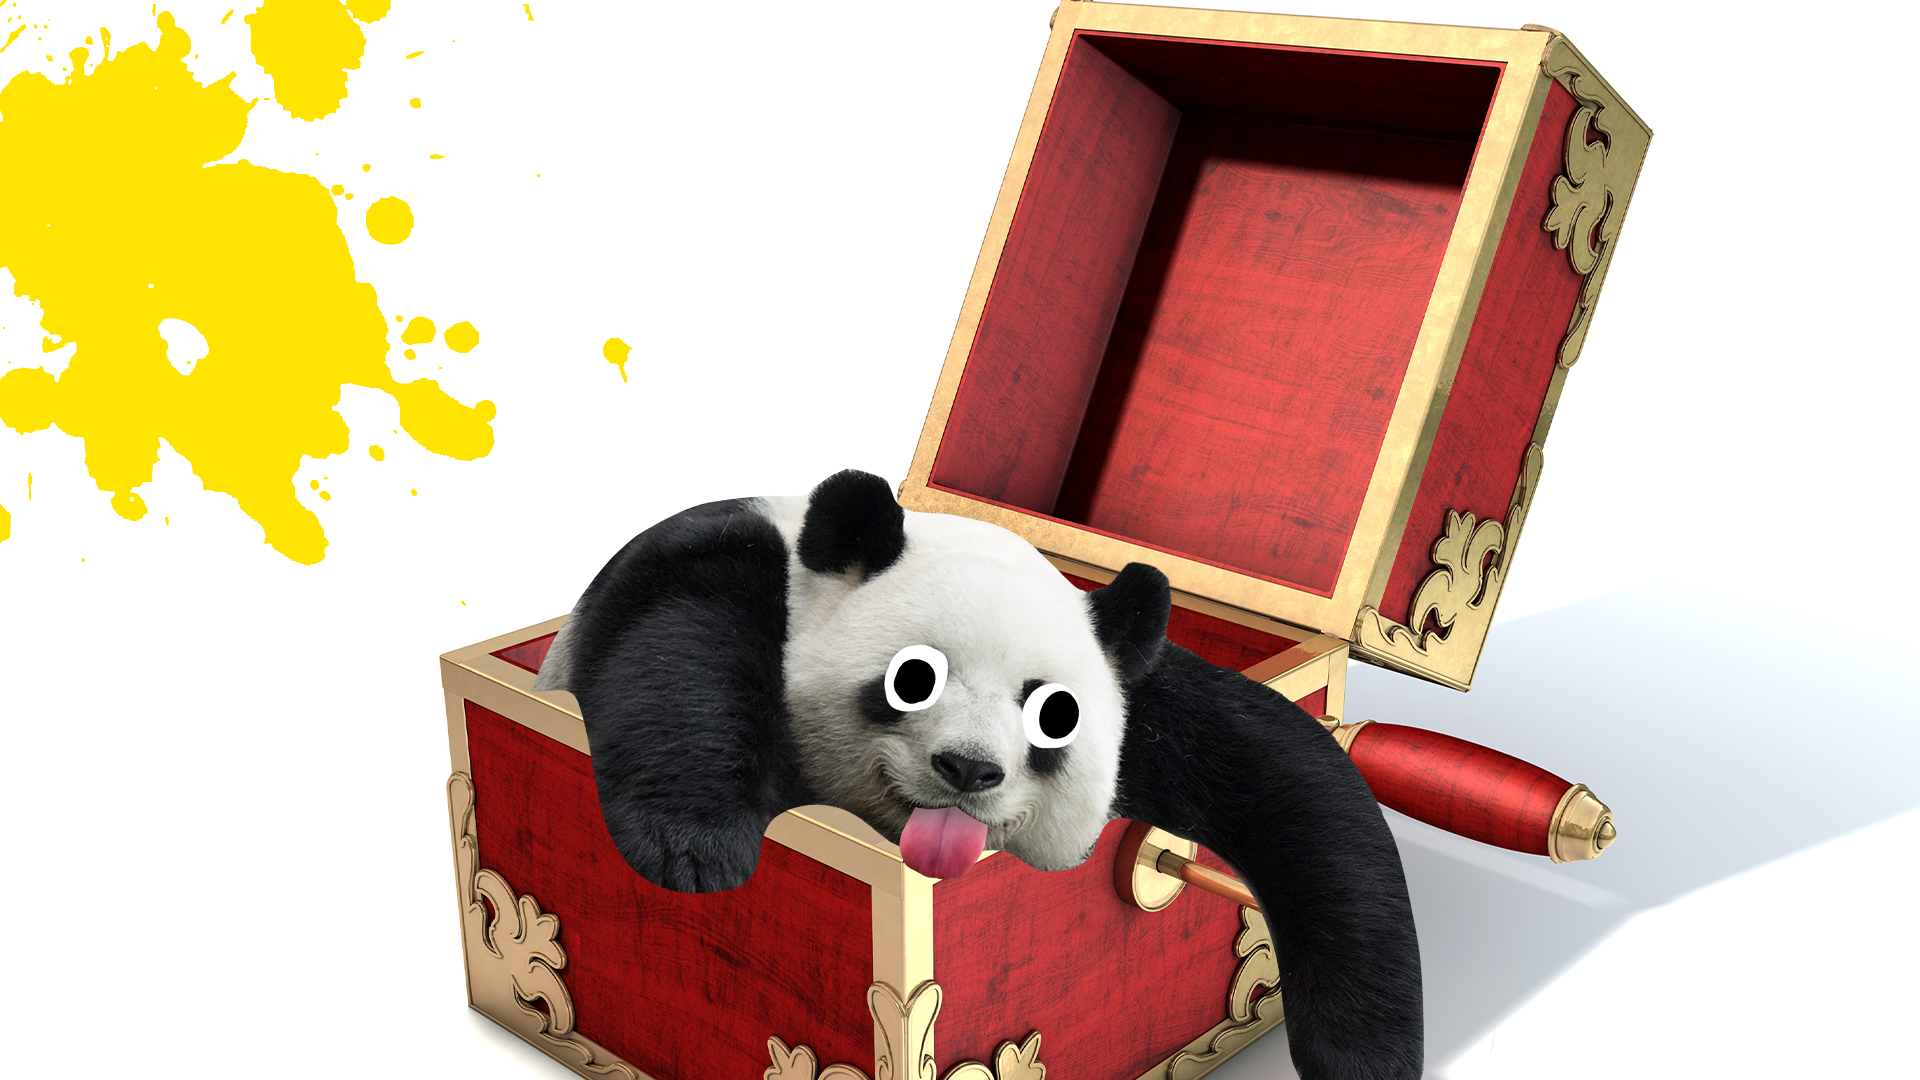 Derpy panda in a jack in the box with splats